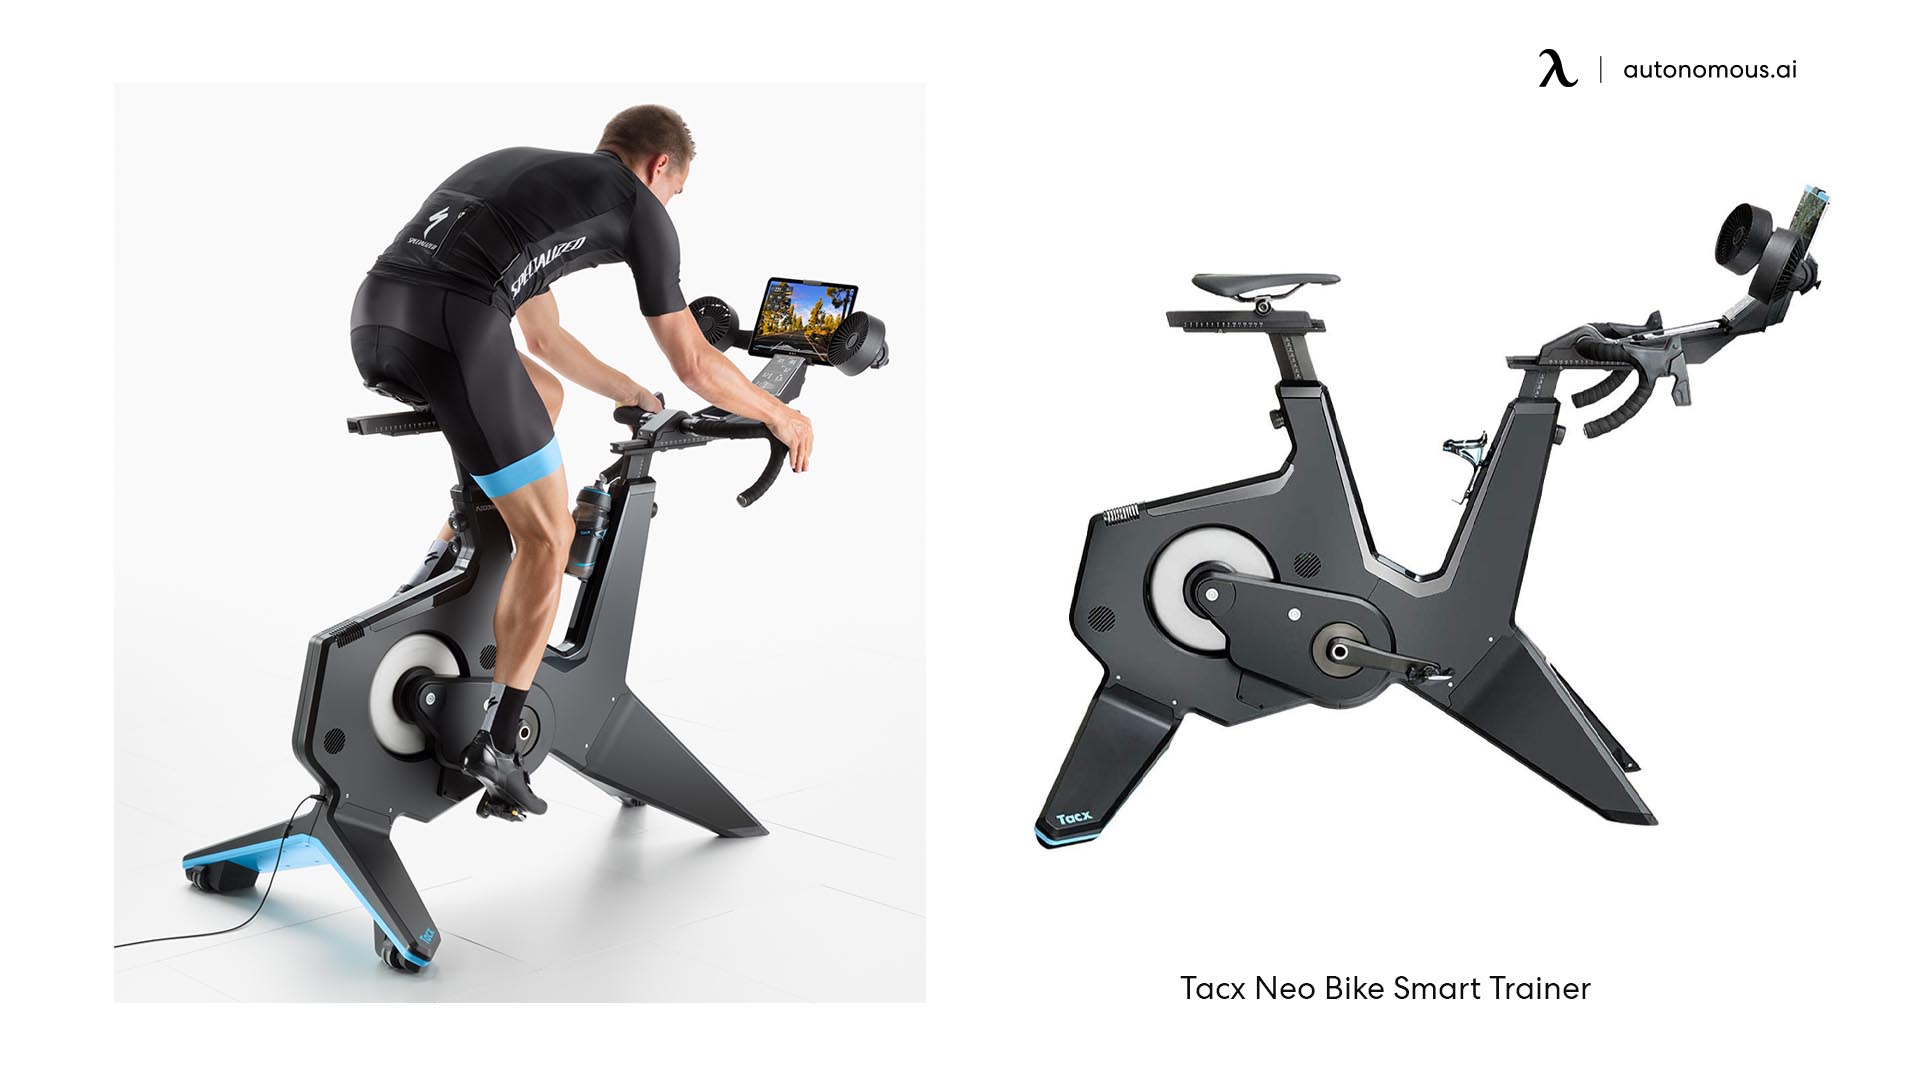 Tacx Neo best indoor cycling bike